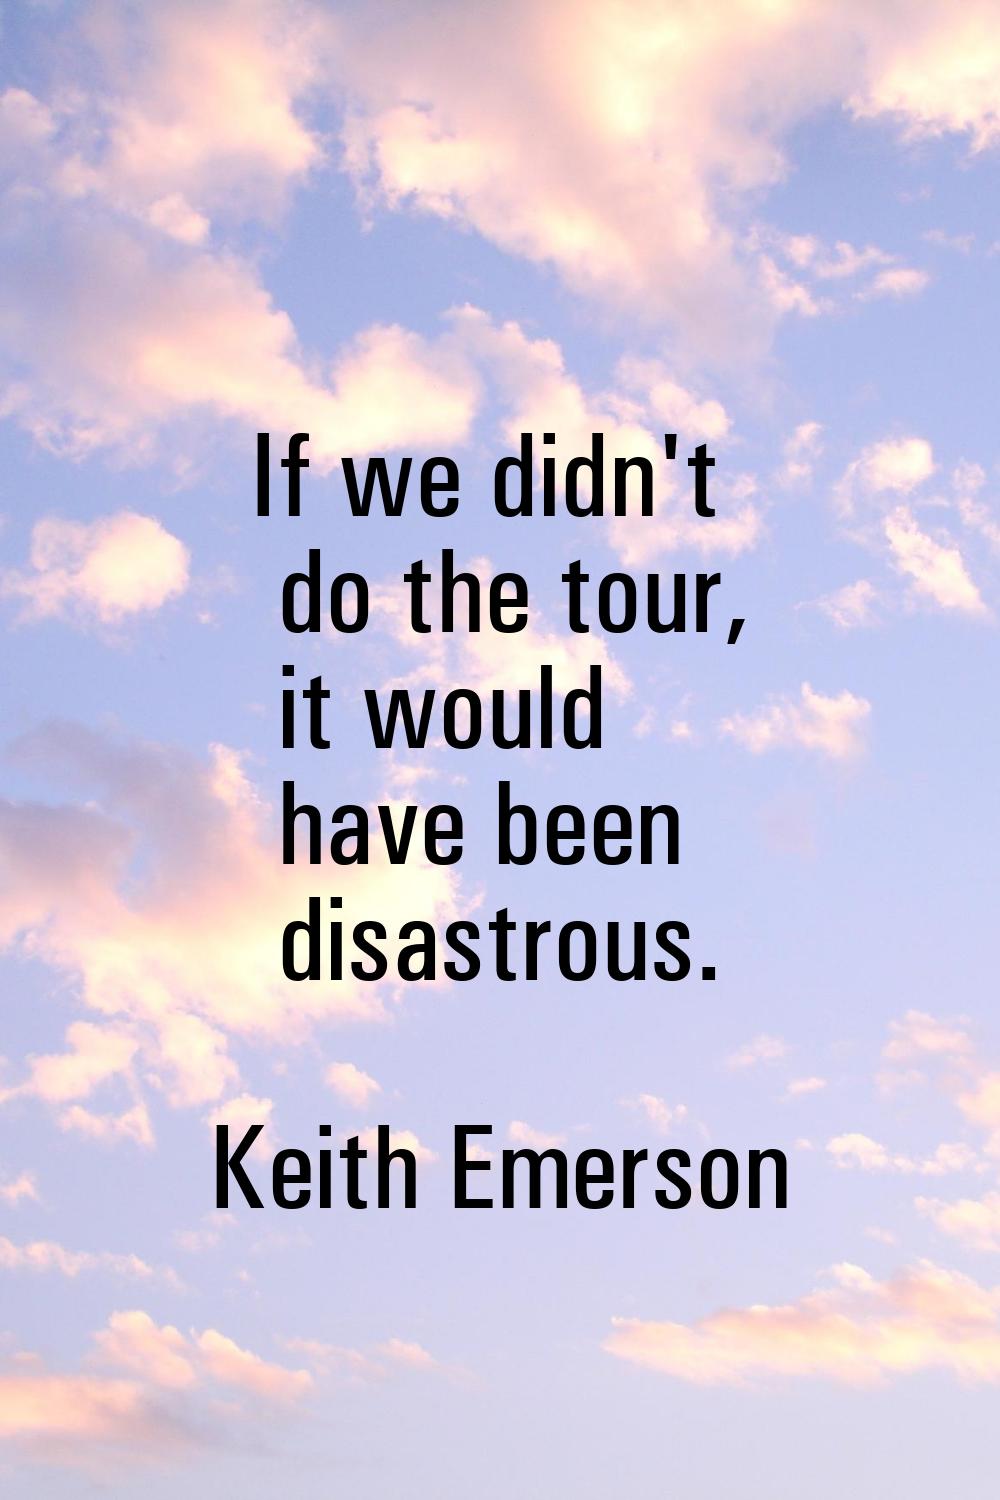 If we didn't do the tour, it would have been disastrous.